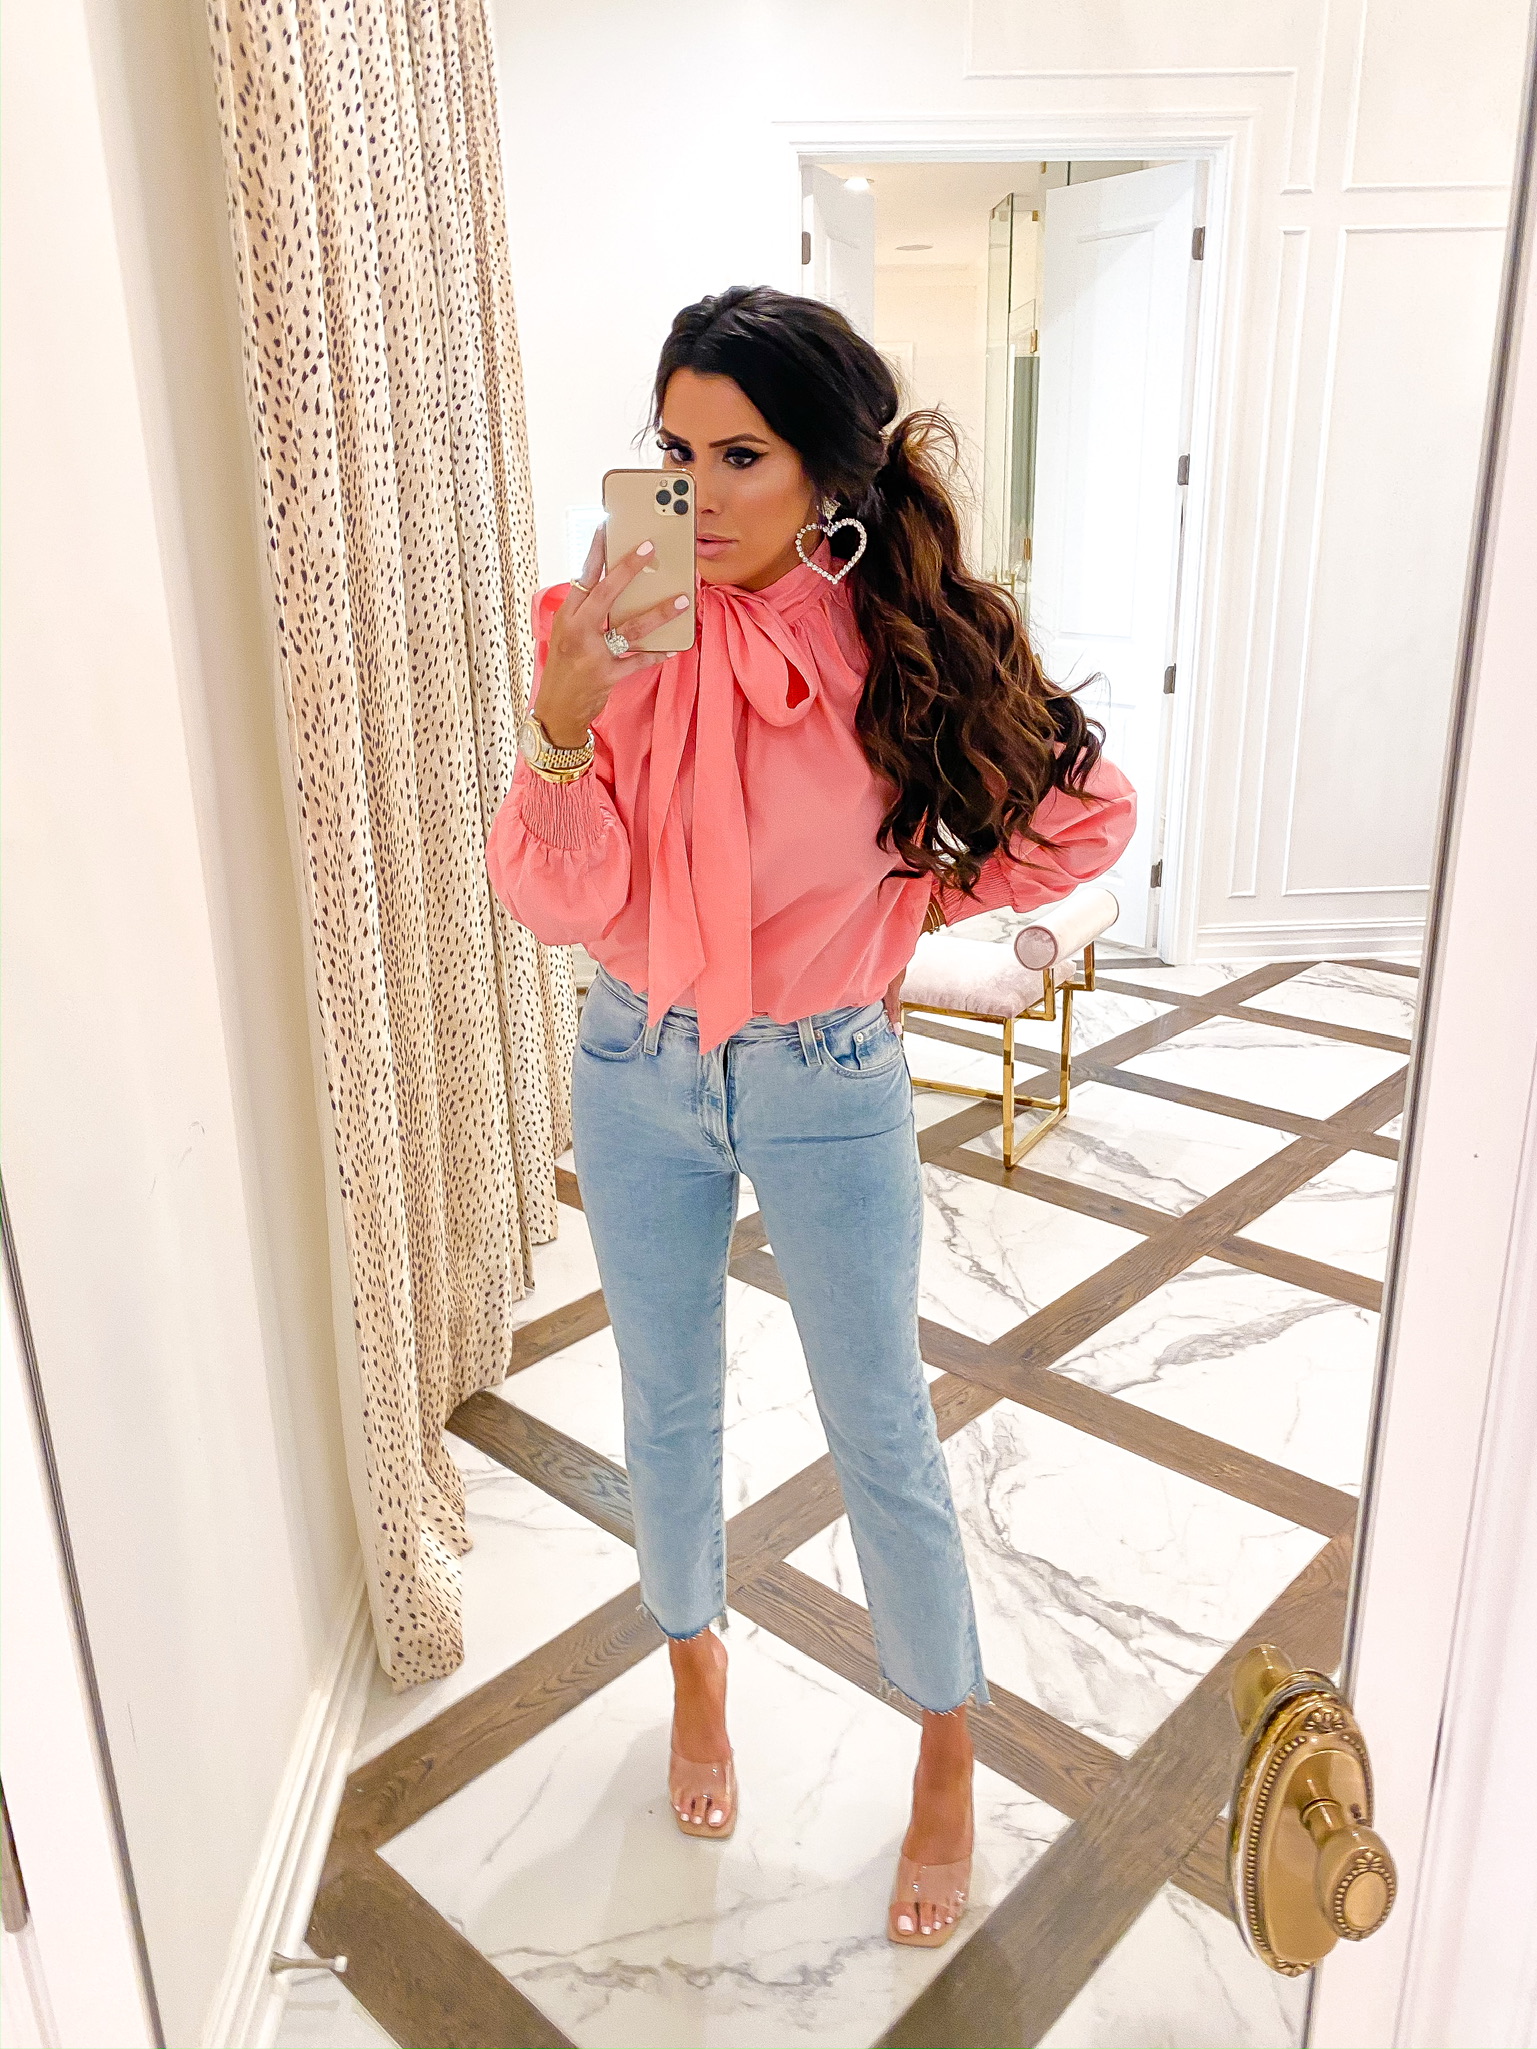 Valentine's Day Outfit Ideas by popular US fashion blog, The Sweetest Thing: image of a woman wearing a Nordstrom The Isabelle High Waist Step Hem Ankle Jeans AG, Nordstrom Pussybow Poplin Blouse TOPSHOP, Asos True Decadence rhinestone crystal heart drop earrings, and Steve Madden SIGNAL CLEAR.